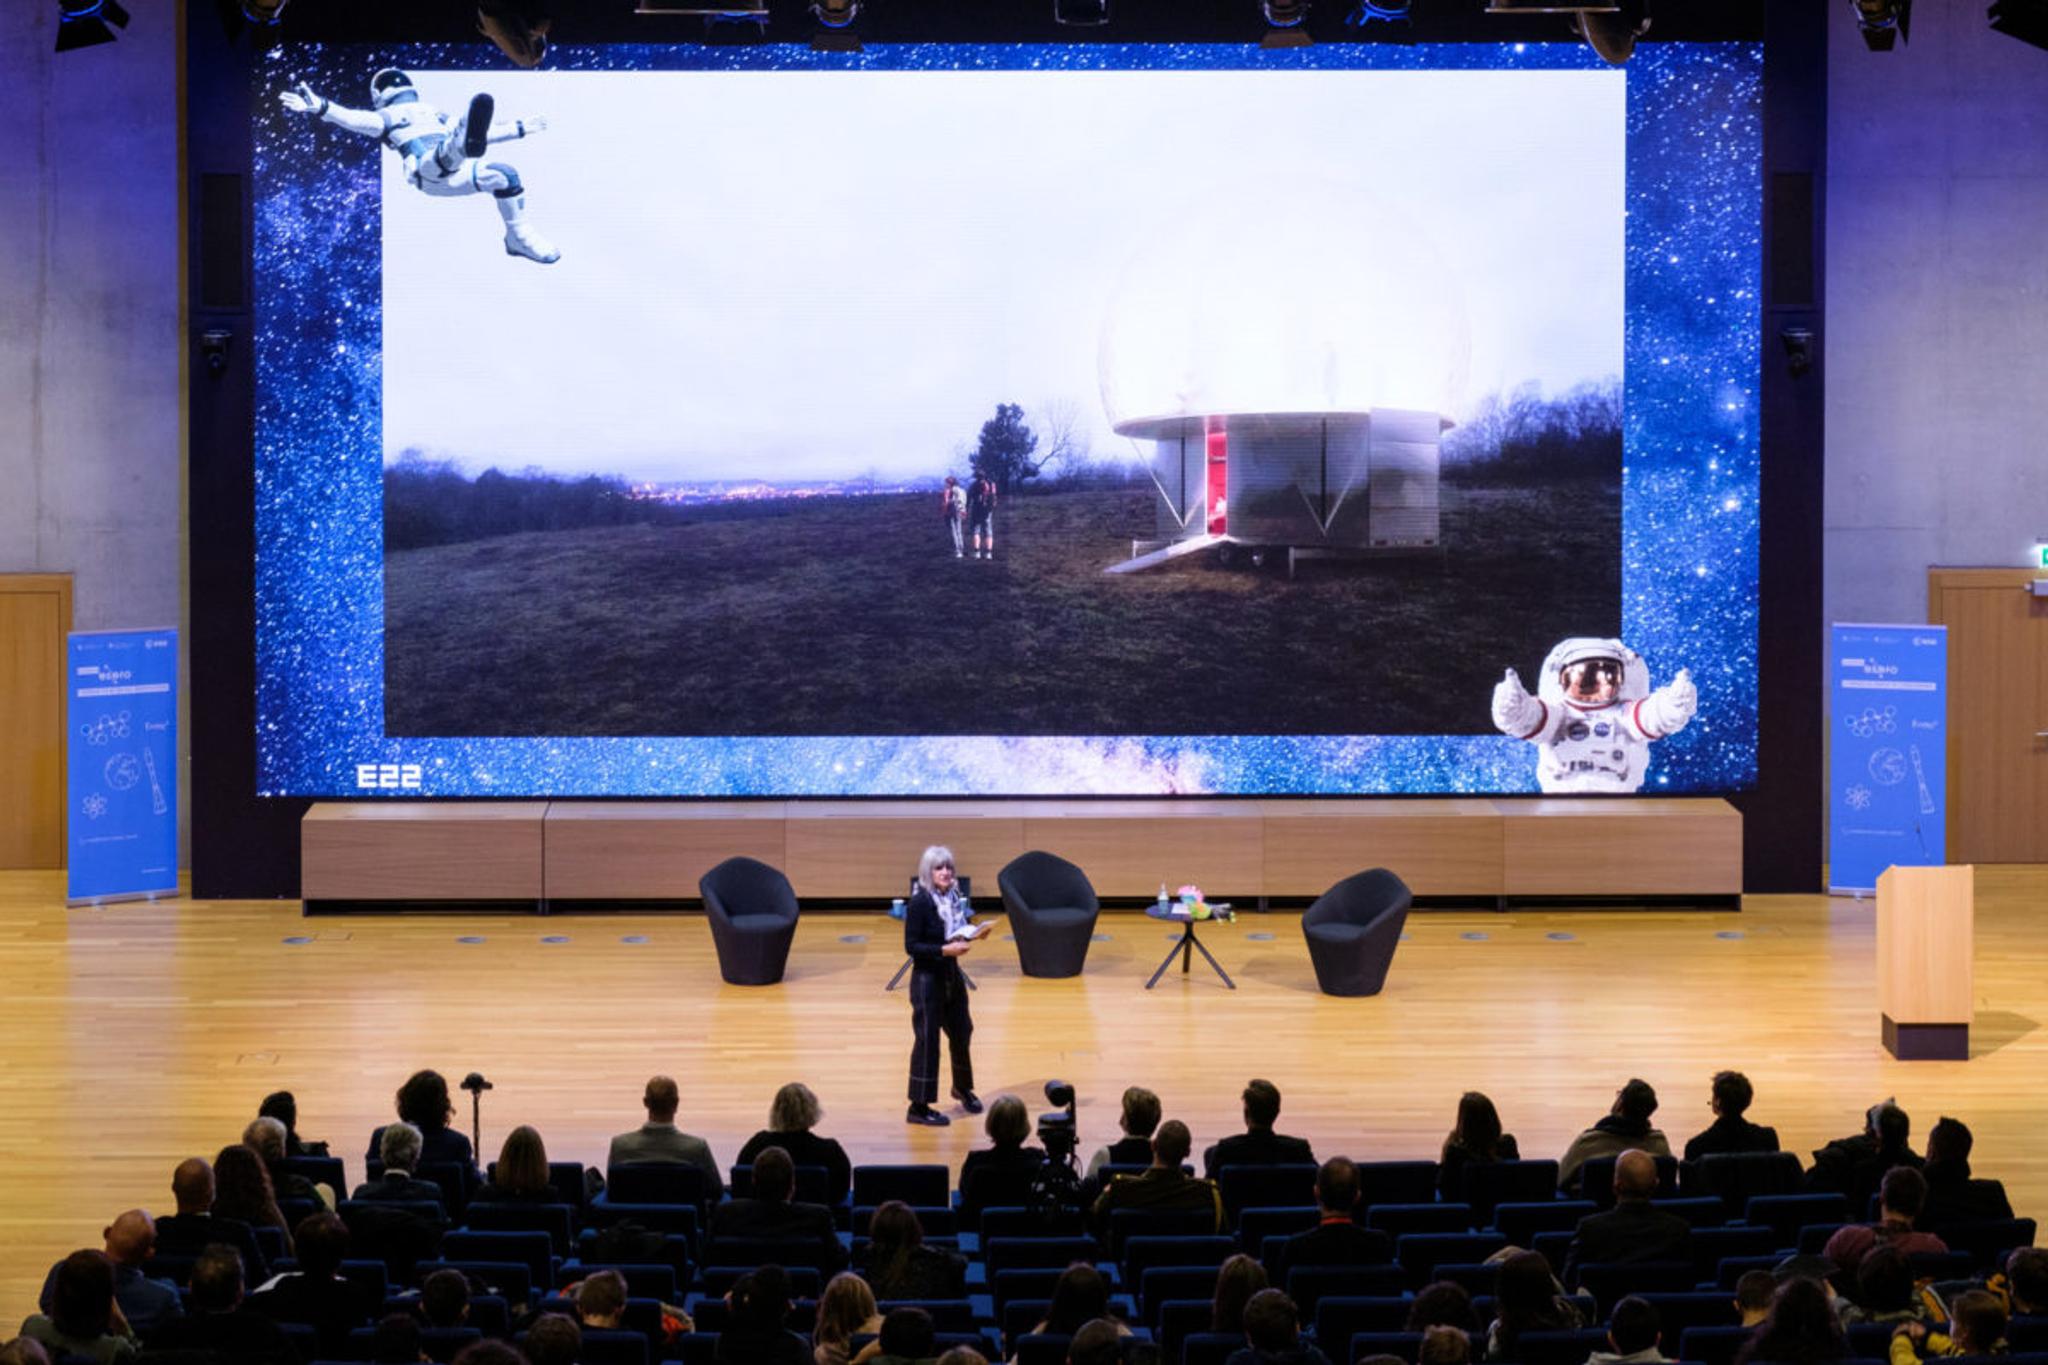 Someone gives a lecture in a modern looking lecture hall with images of astronauts behind her.